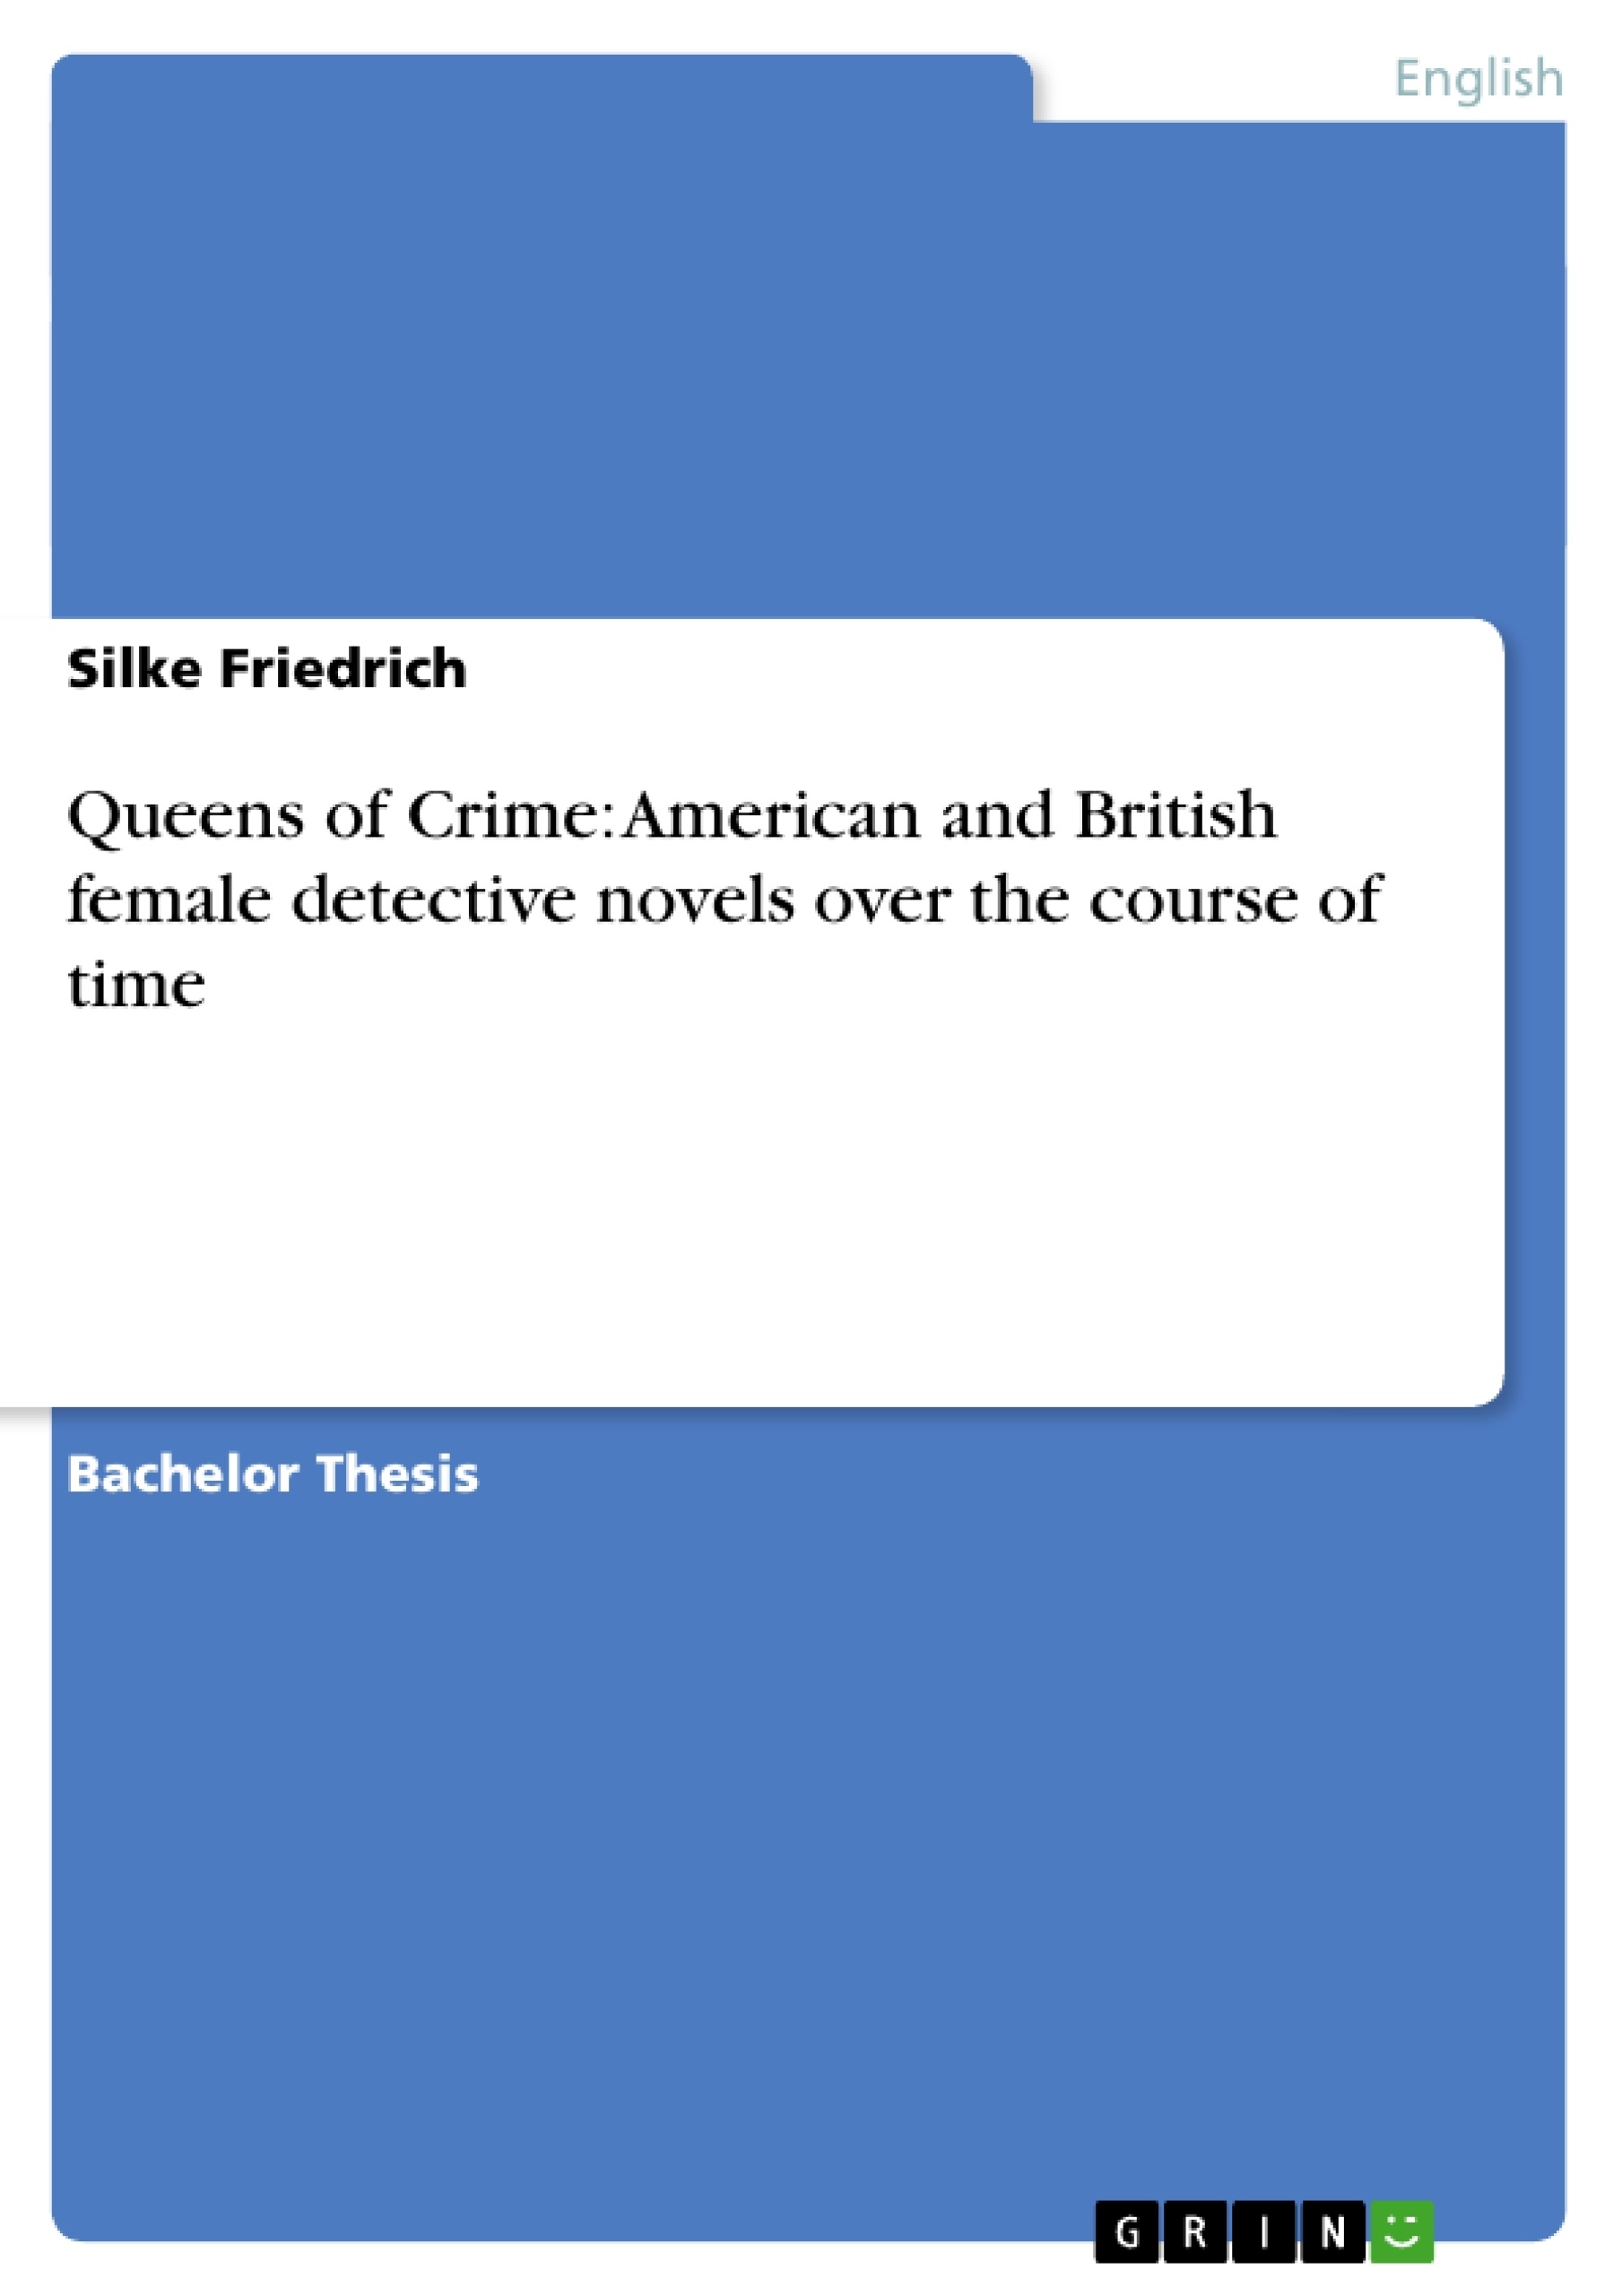 Título: Queens of Crime: American and British female detective novels over the course of time